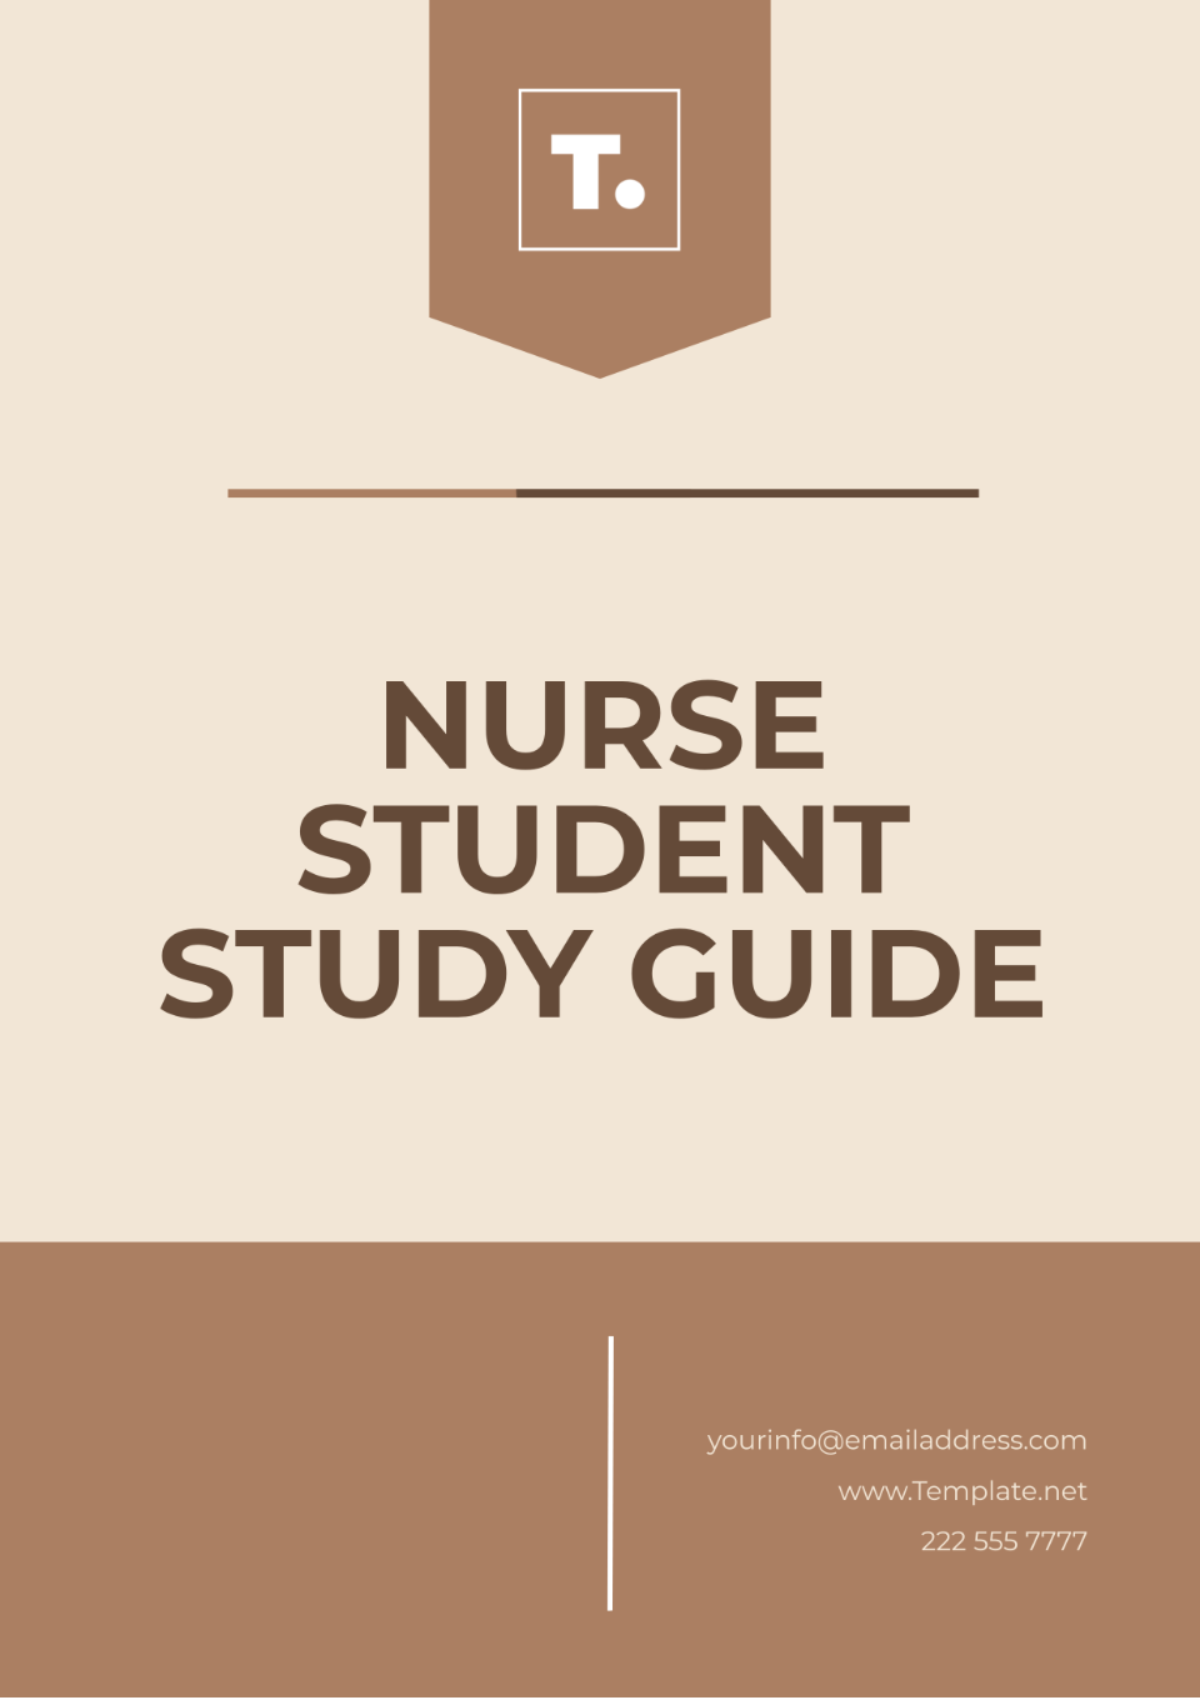 Free Nurse Student Study Guide Template